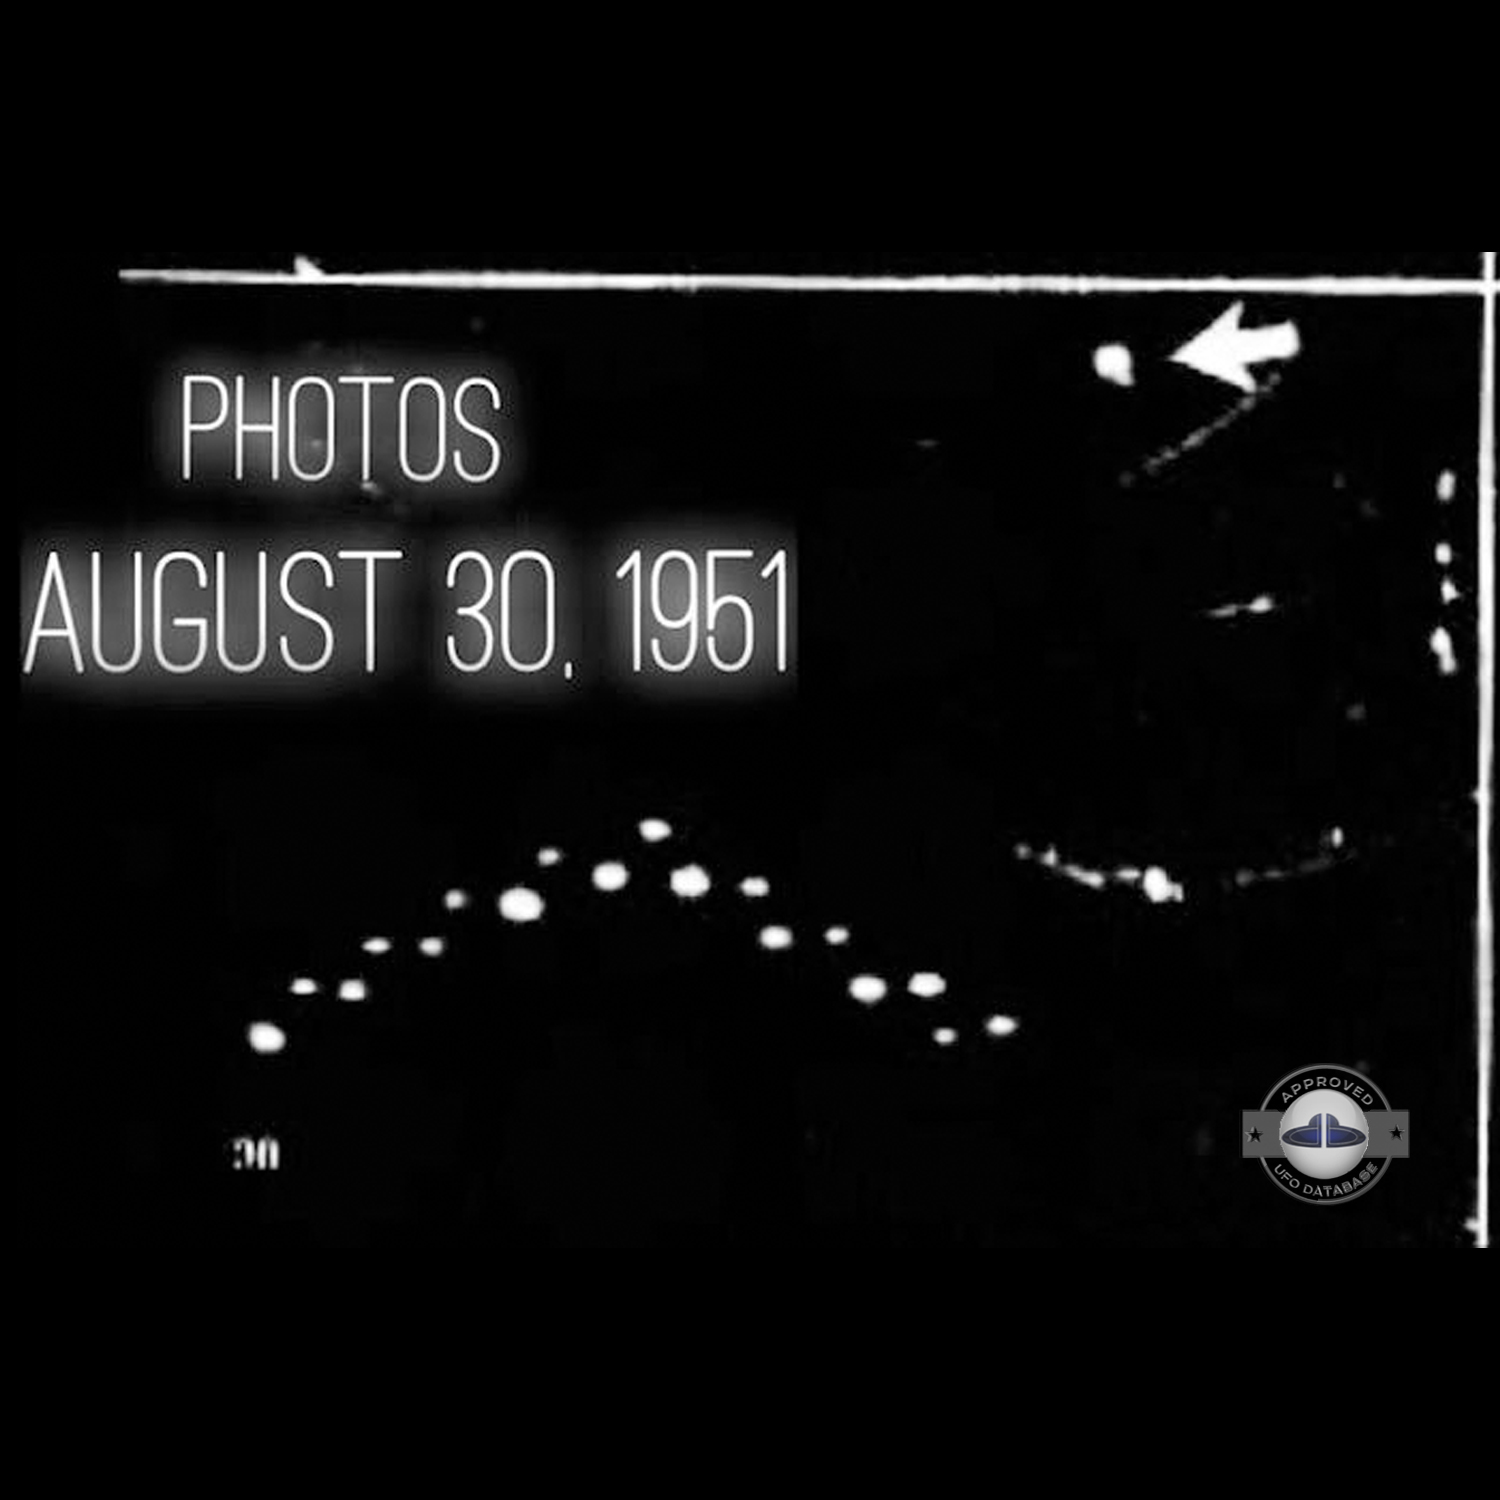 UFO picture show 18 luminous UFO arranged in a crescent formation UFO Picture #117-4